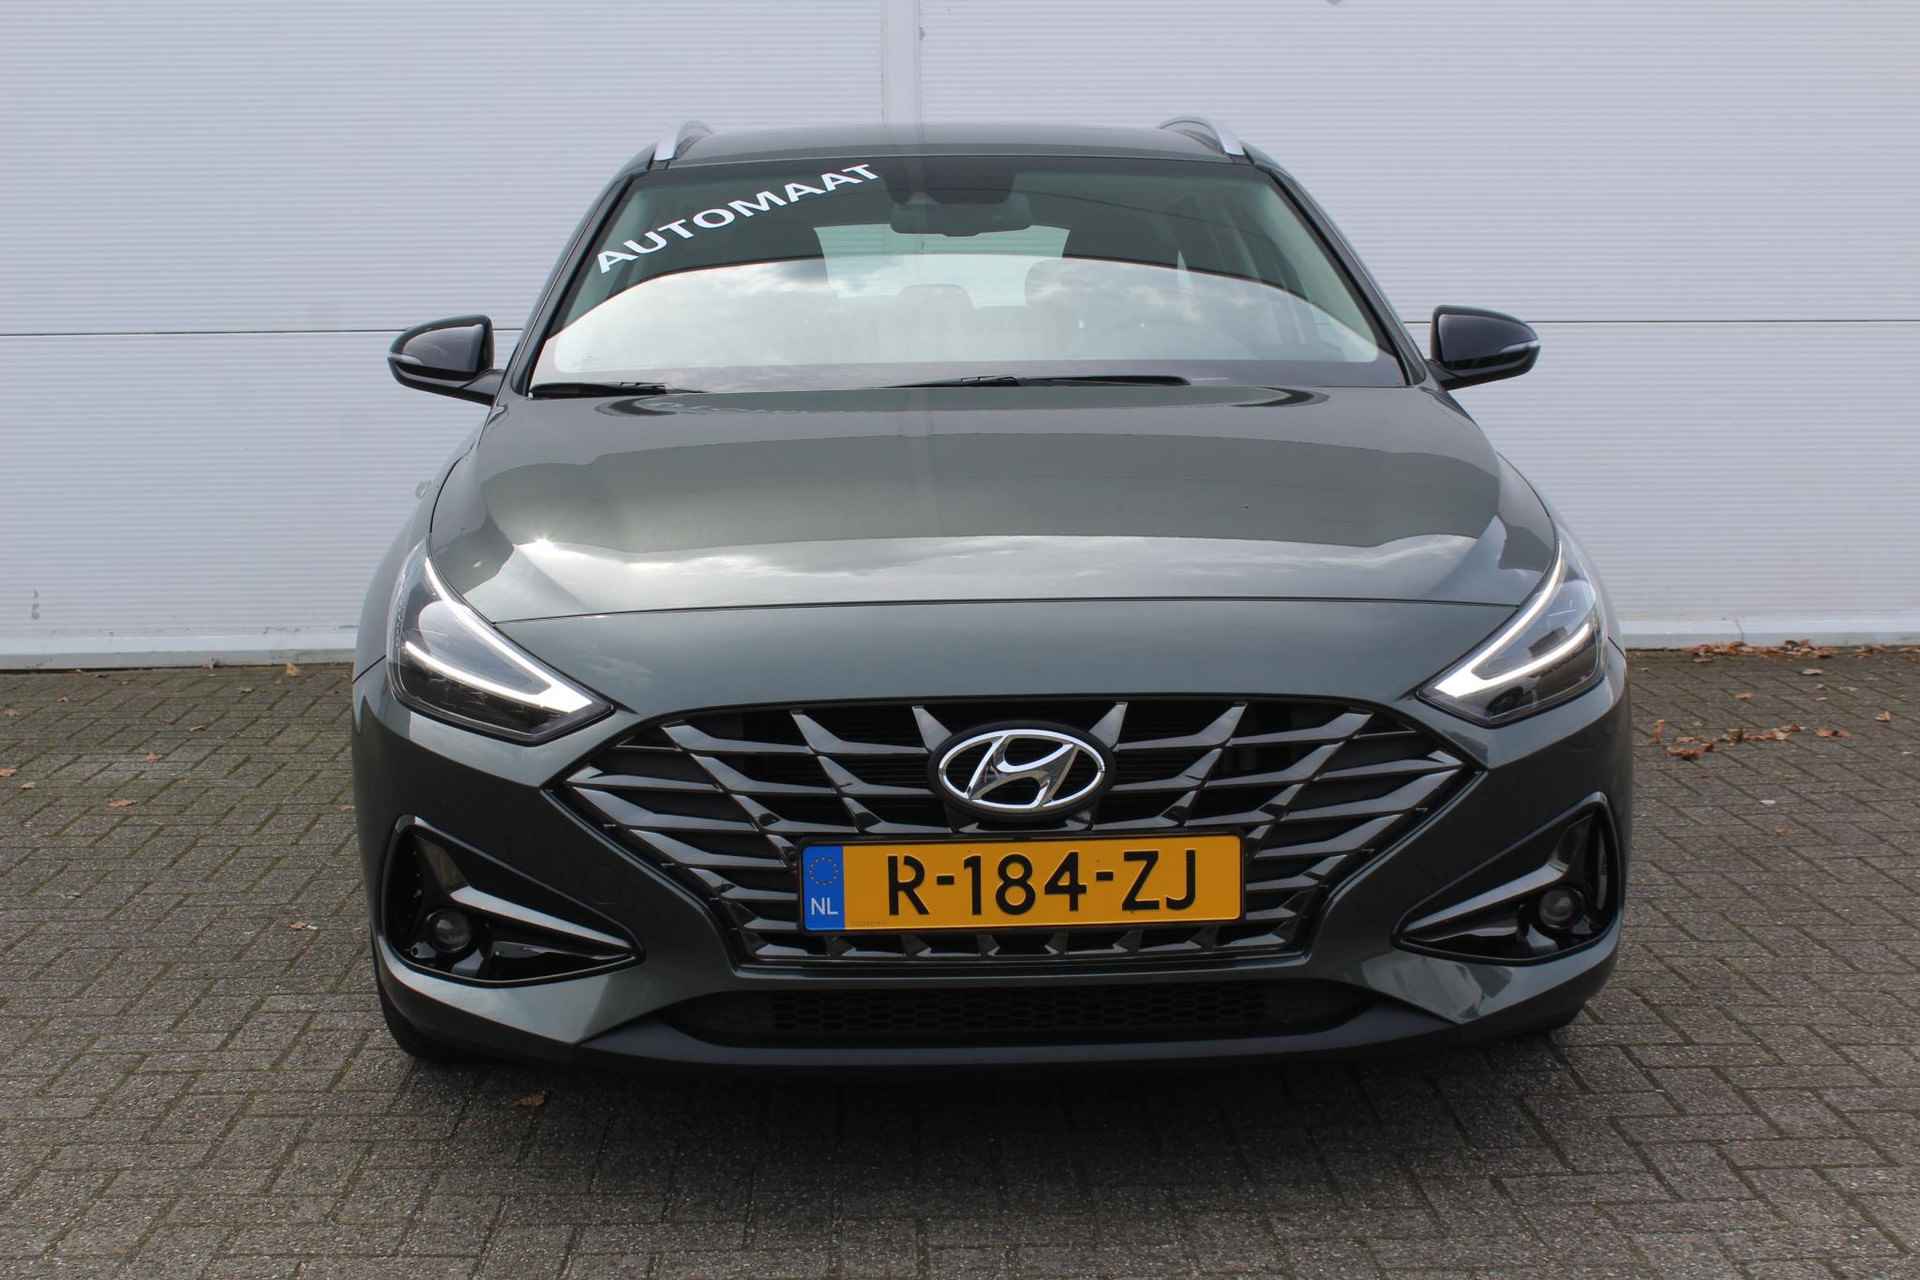 Hyundai i30 Wagon 1.0 T-GDi MHEV Comfort Smart AUTOMAAT / Navigatie + Apple Carplay/Android Auto / Cruise Control / Achteruitrijcamera / Climate Control / Keyless Entry & Start / - 41/43